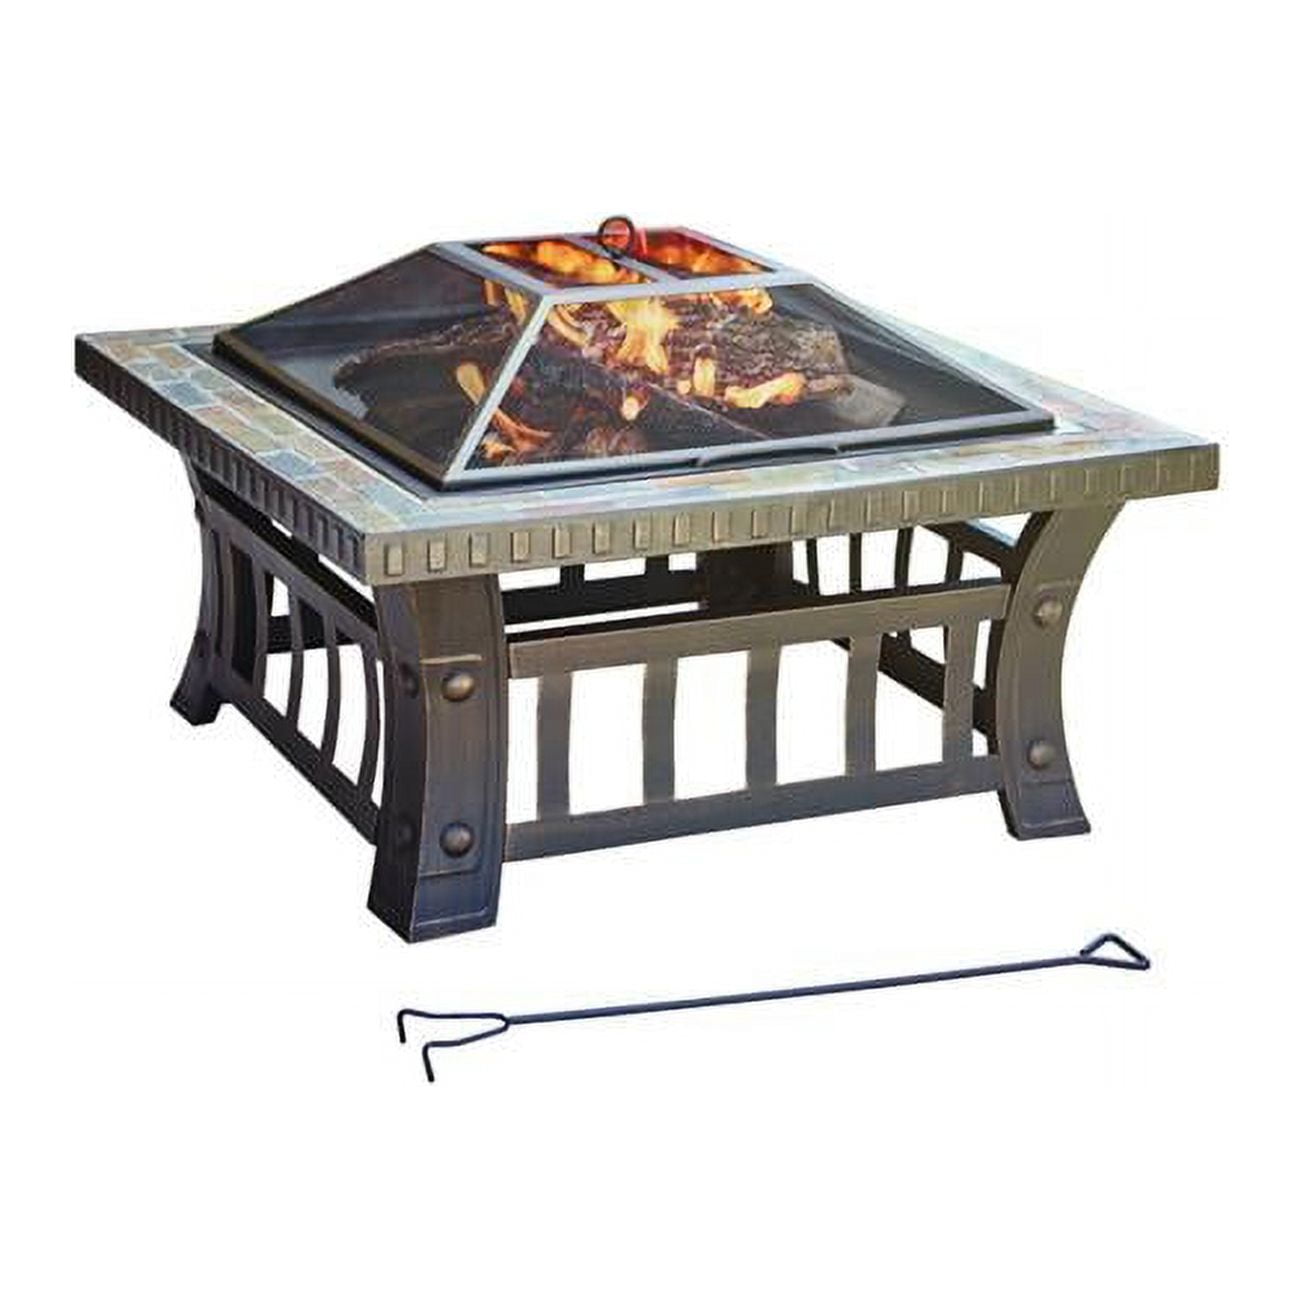 4903852 Steel Square Wood Fire Pit - 20 X 30 X 30 In.